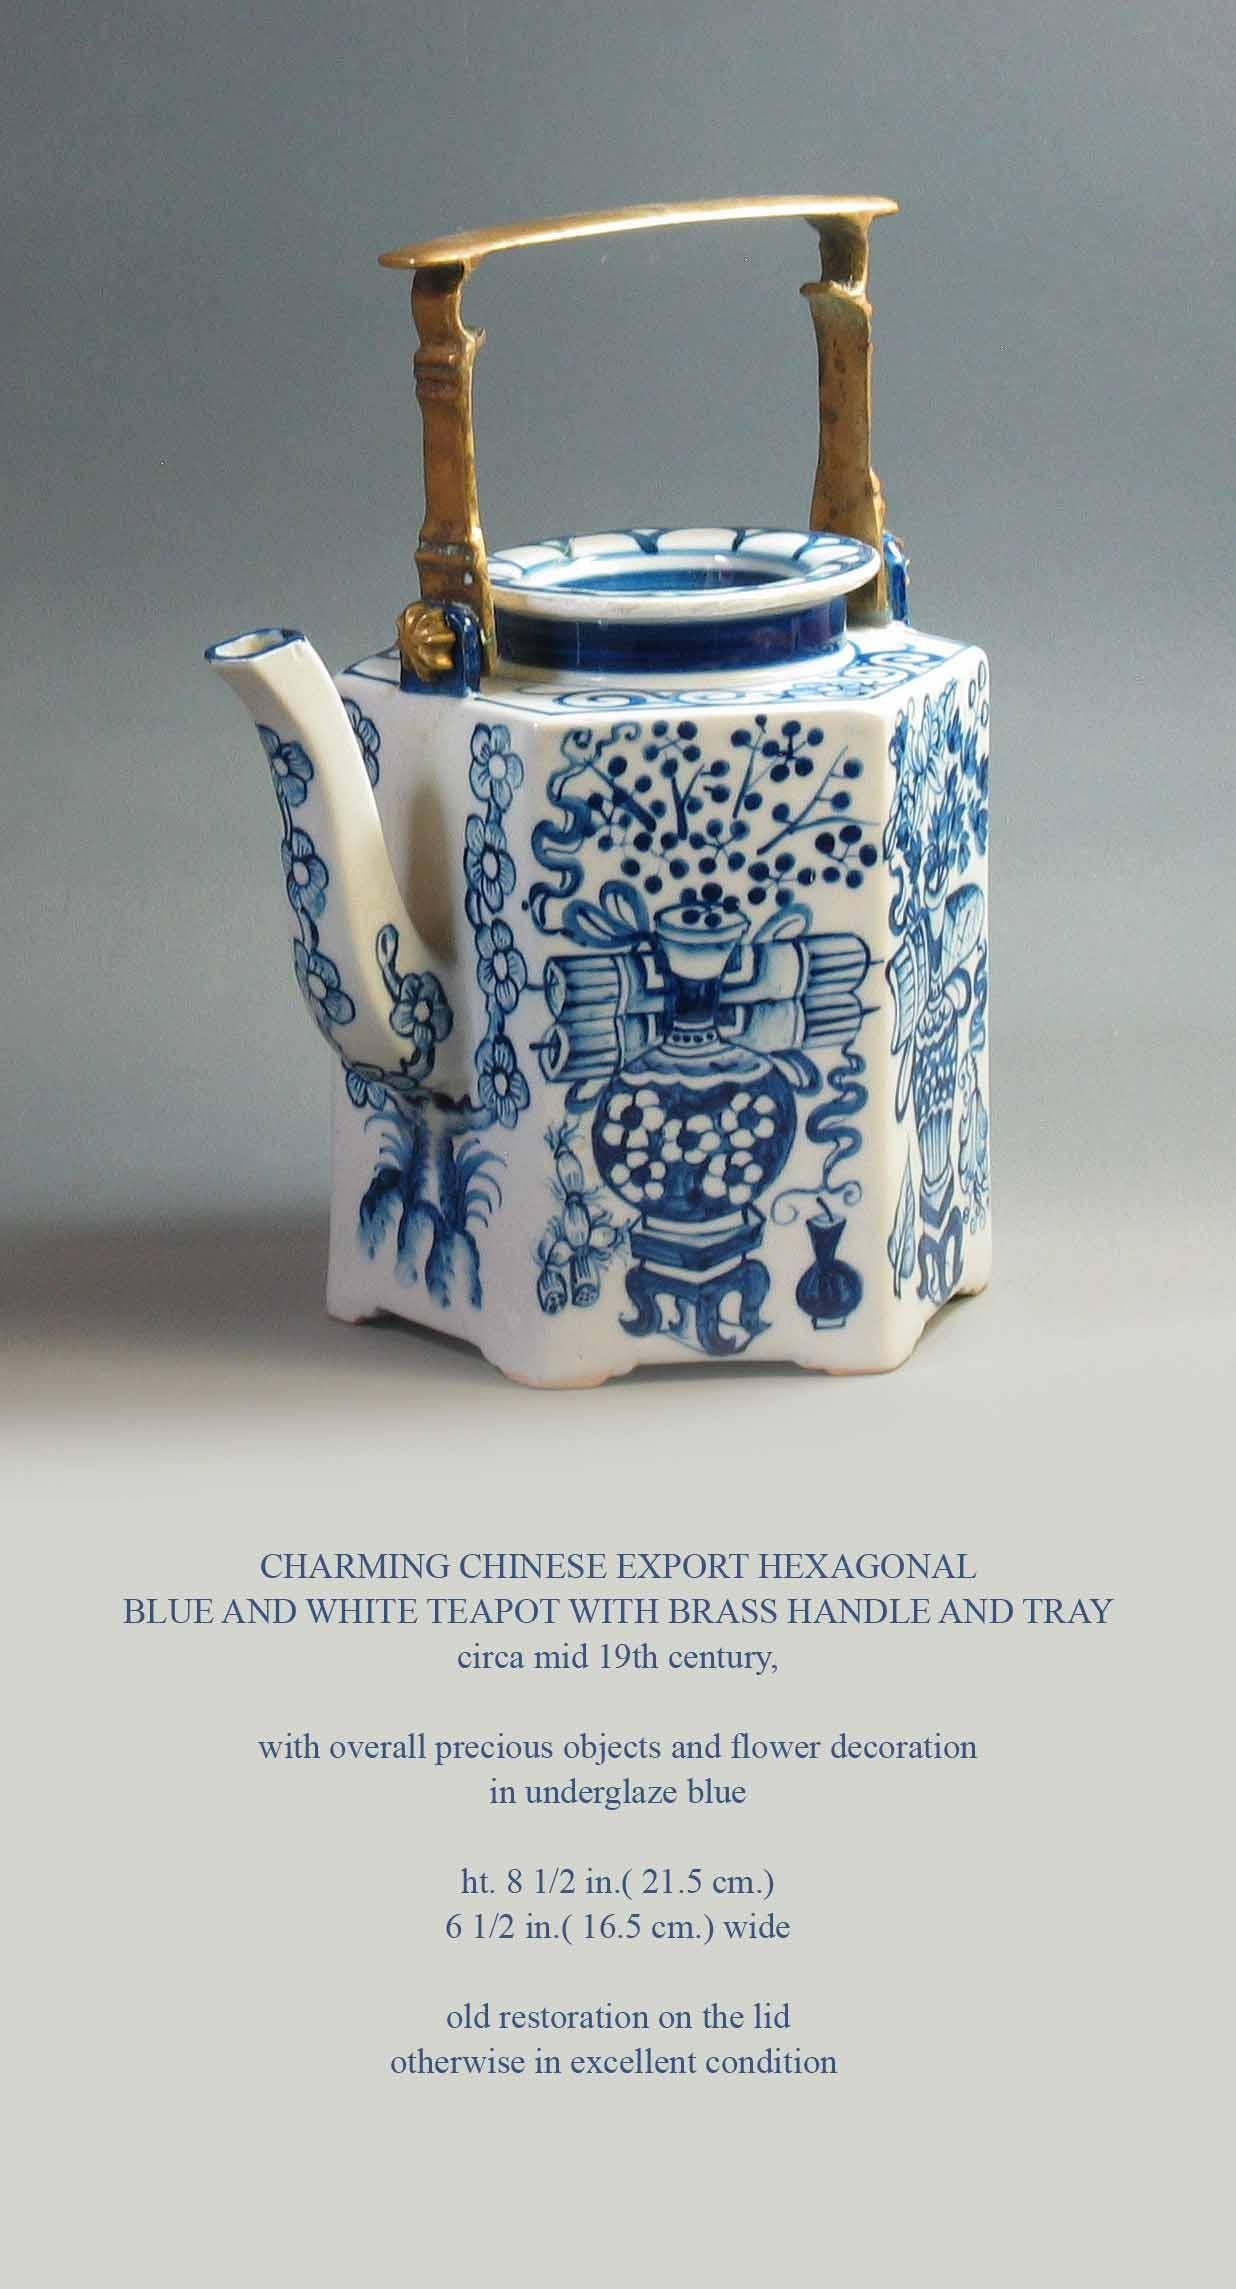 Charming Chinese Export hexagonal blue and white teapot with brass handle and tray, circa mid-19th century, overall precious objects and flower decoration in unglaze blue. Measures: Height is 8 1/2